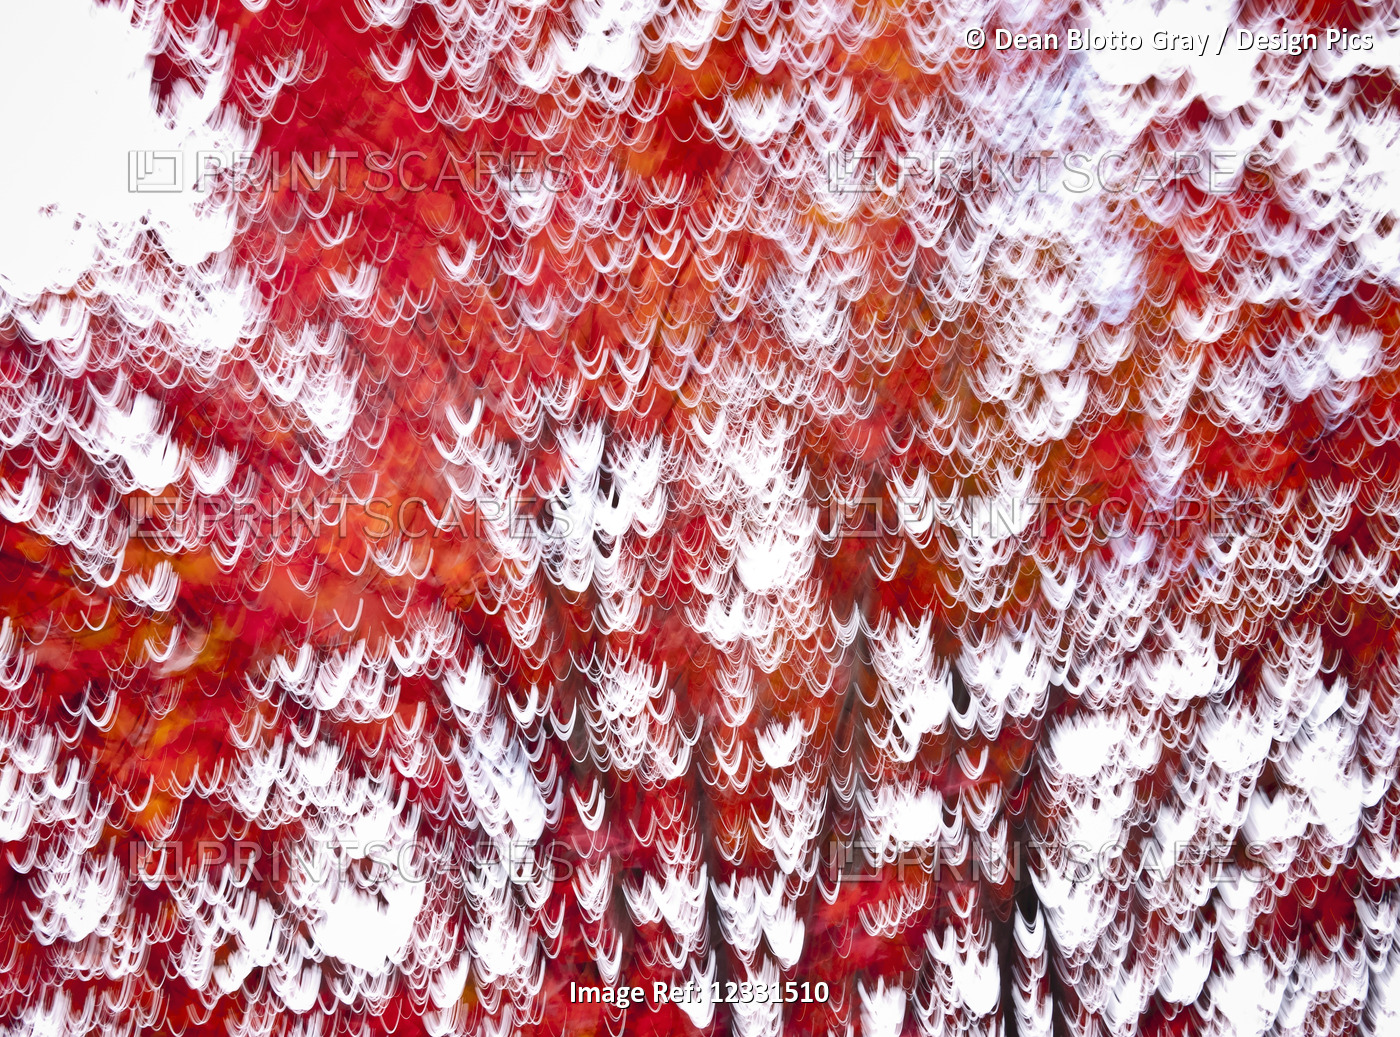 Abstract in red and white; Burlington, Vermont, United States of America